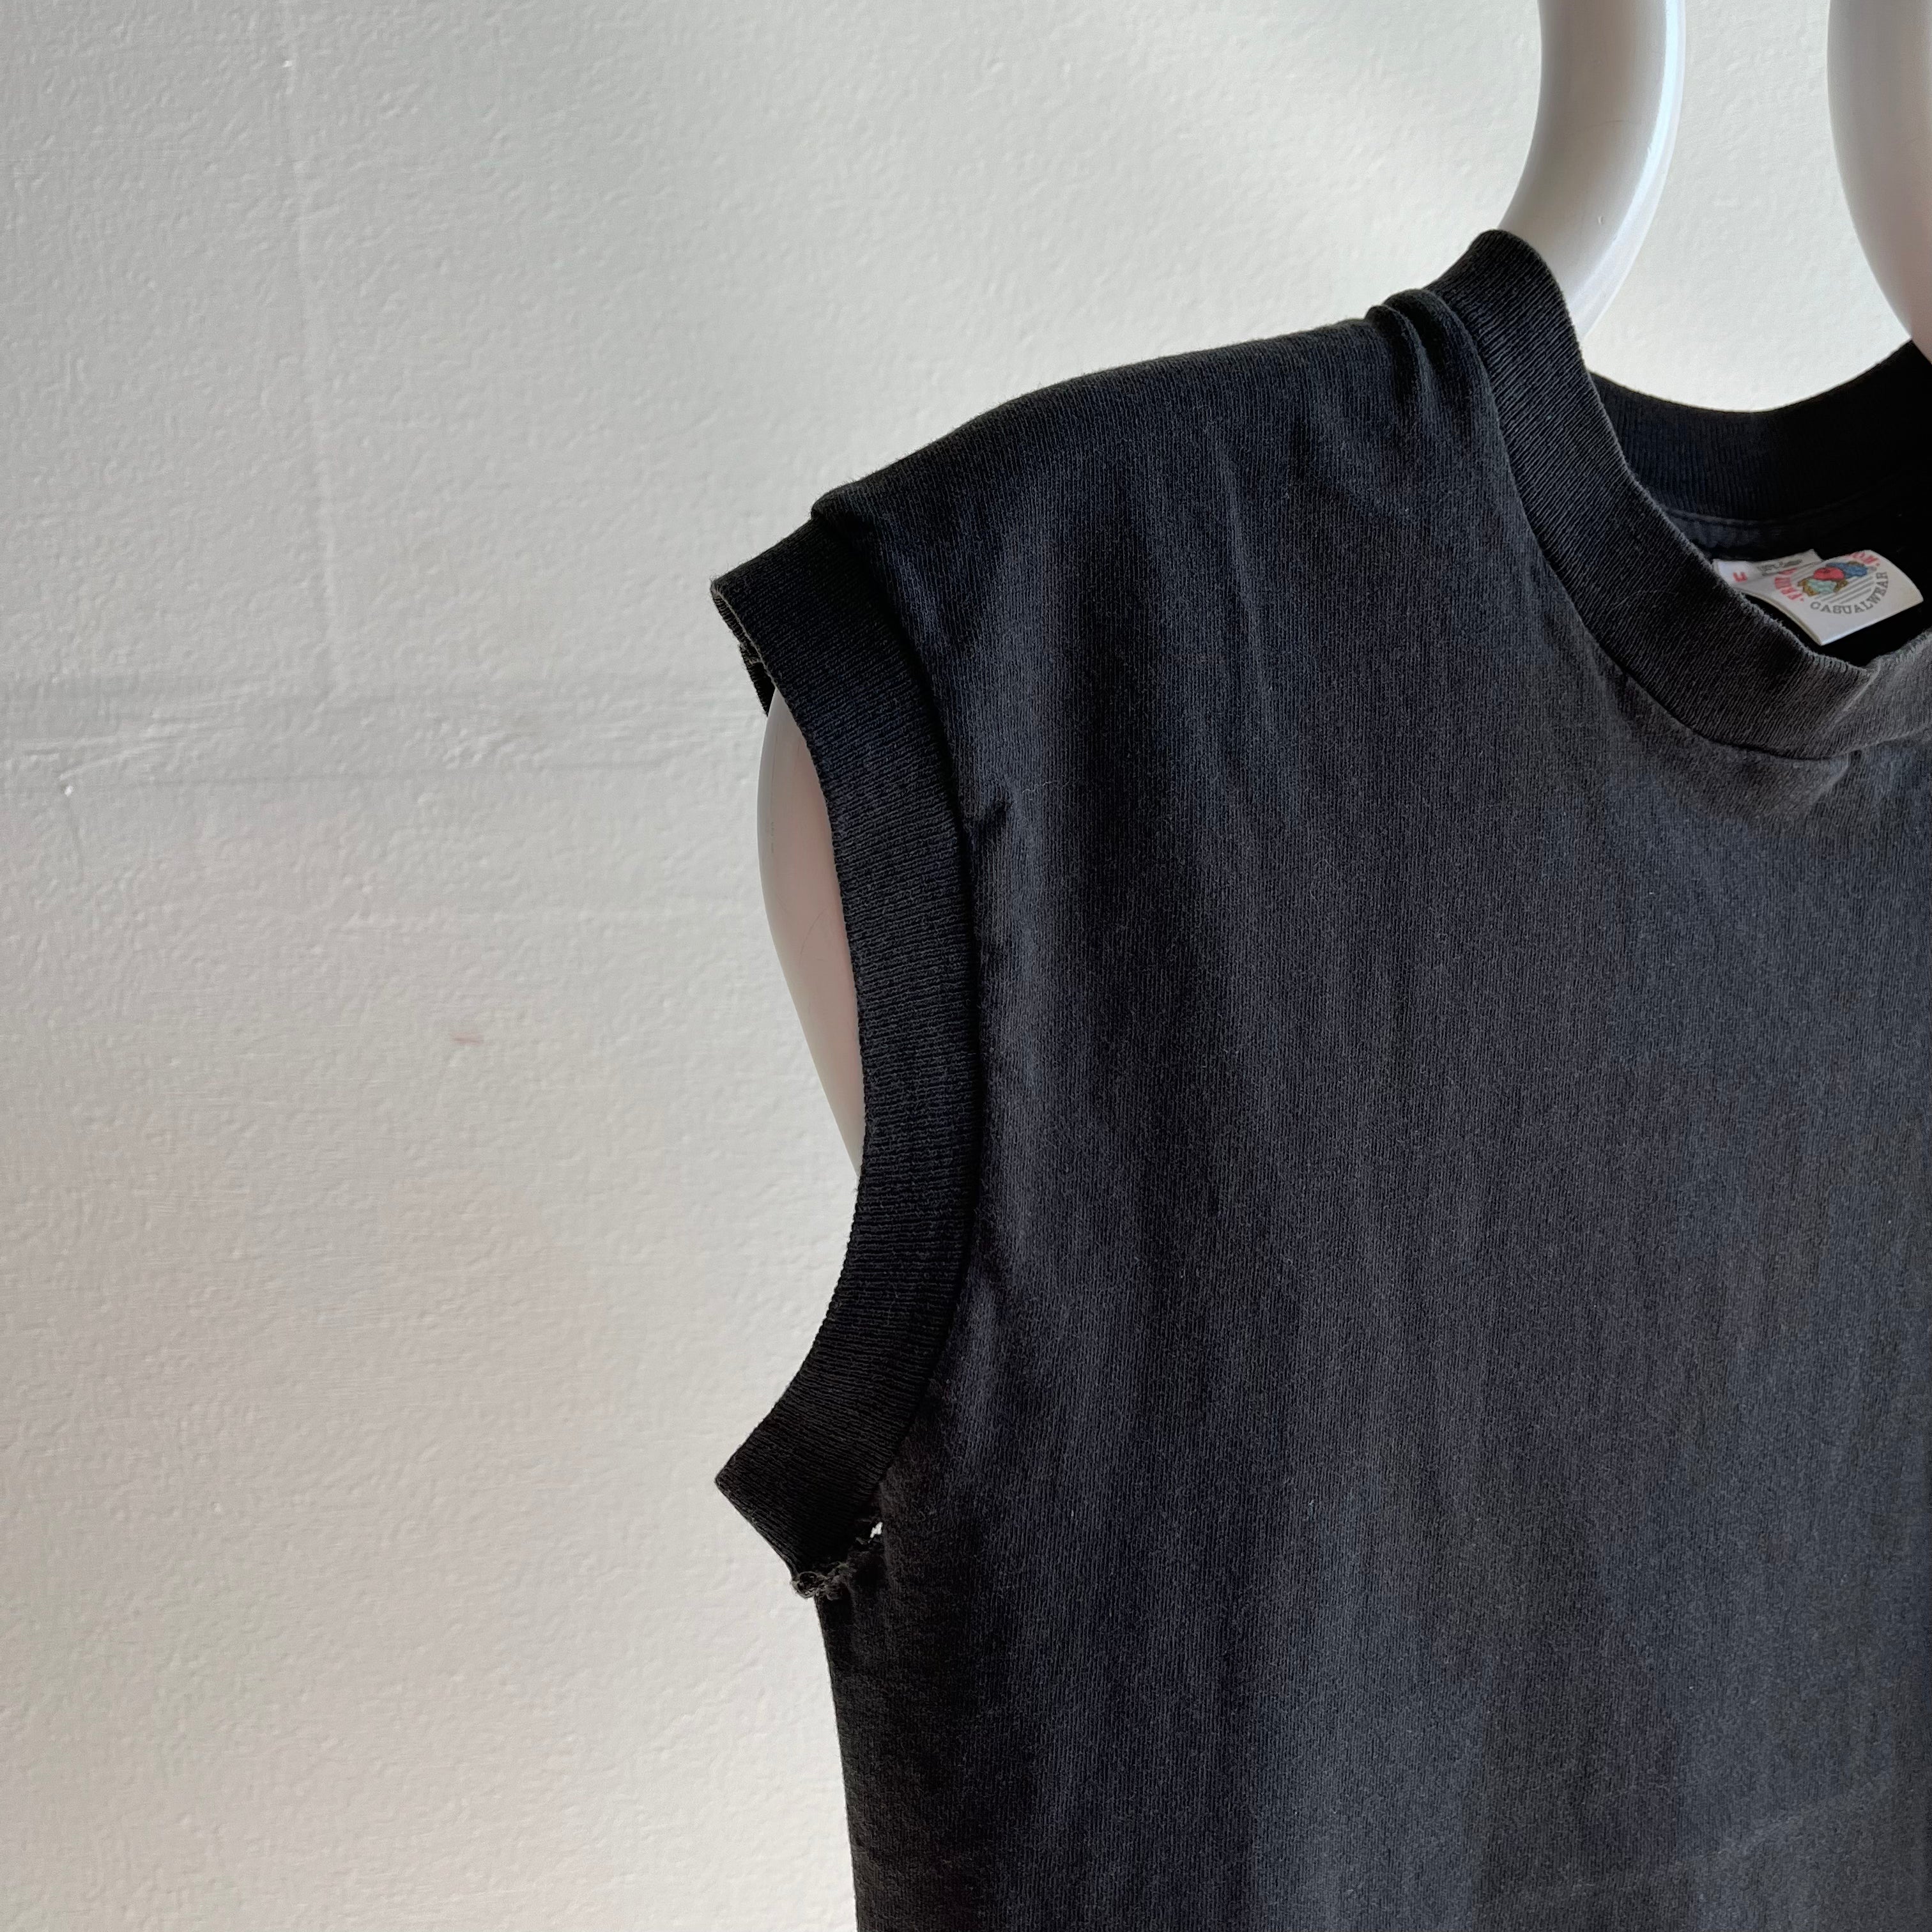 1990s Faded Cotton Muscle Tank with Holes by FOTL